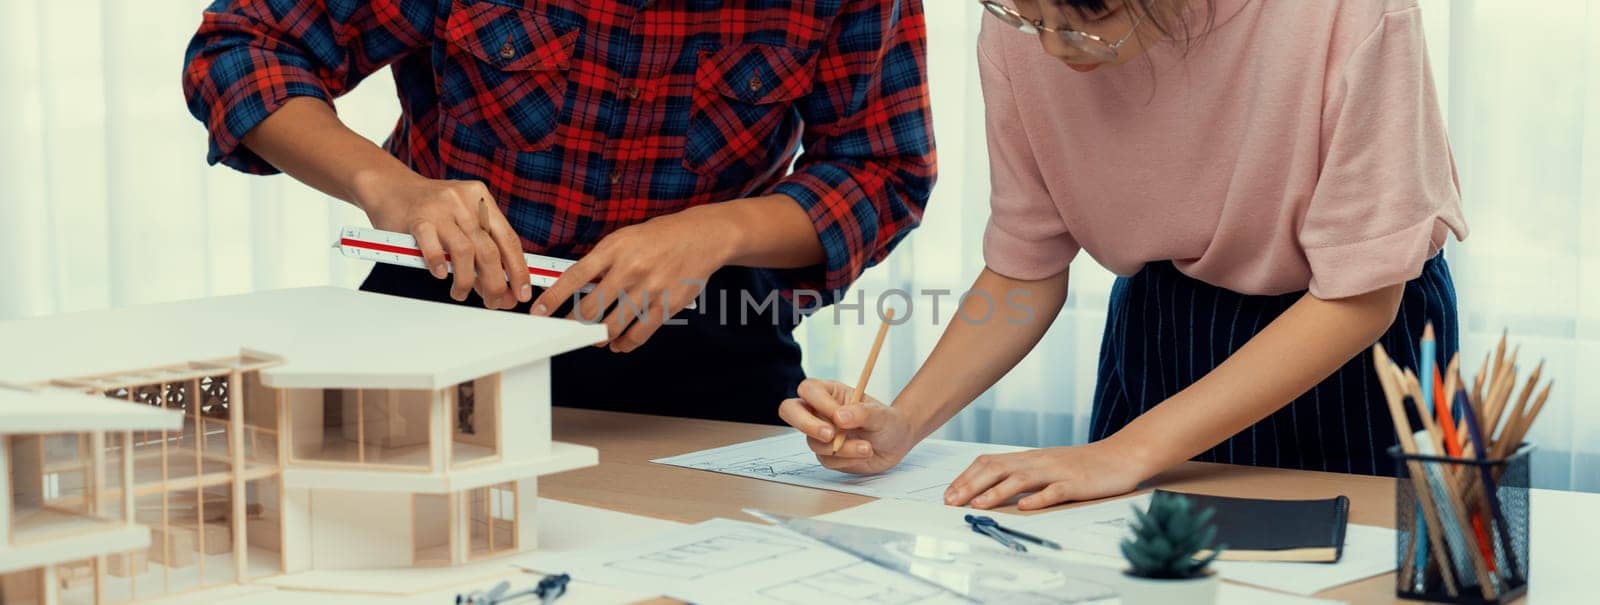 Smart architect engineer and interior designer working together and measuring house model by using ruler on meeting table with blueprint and architectural equipment. Teamwork concept. Burgeoning.